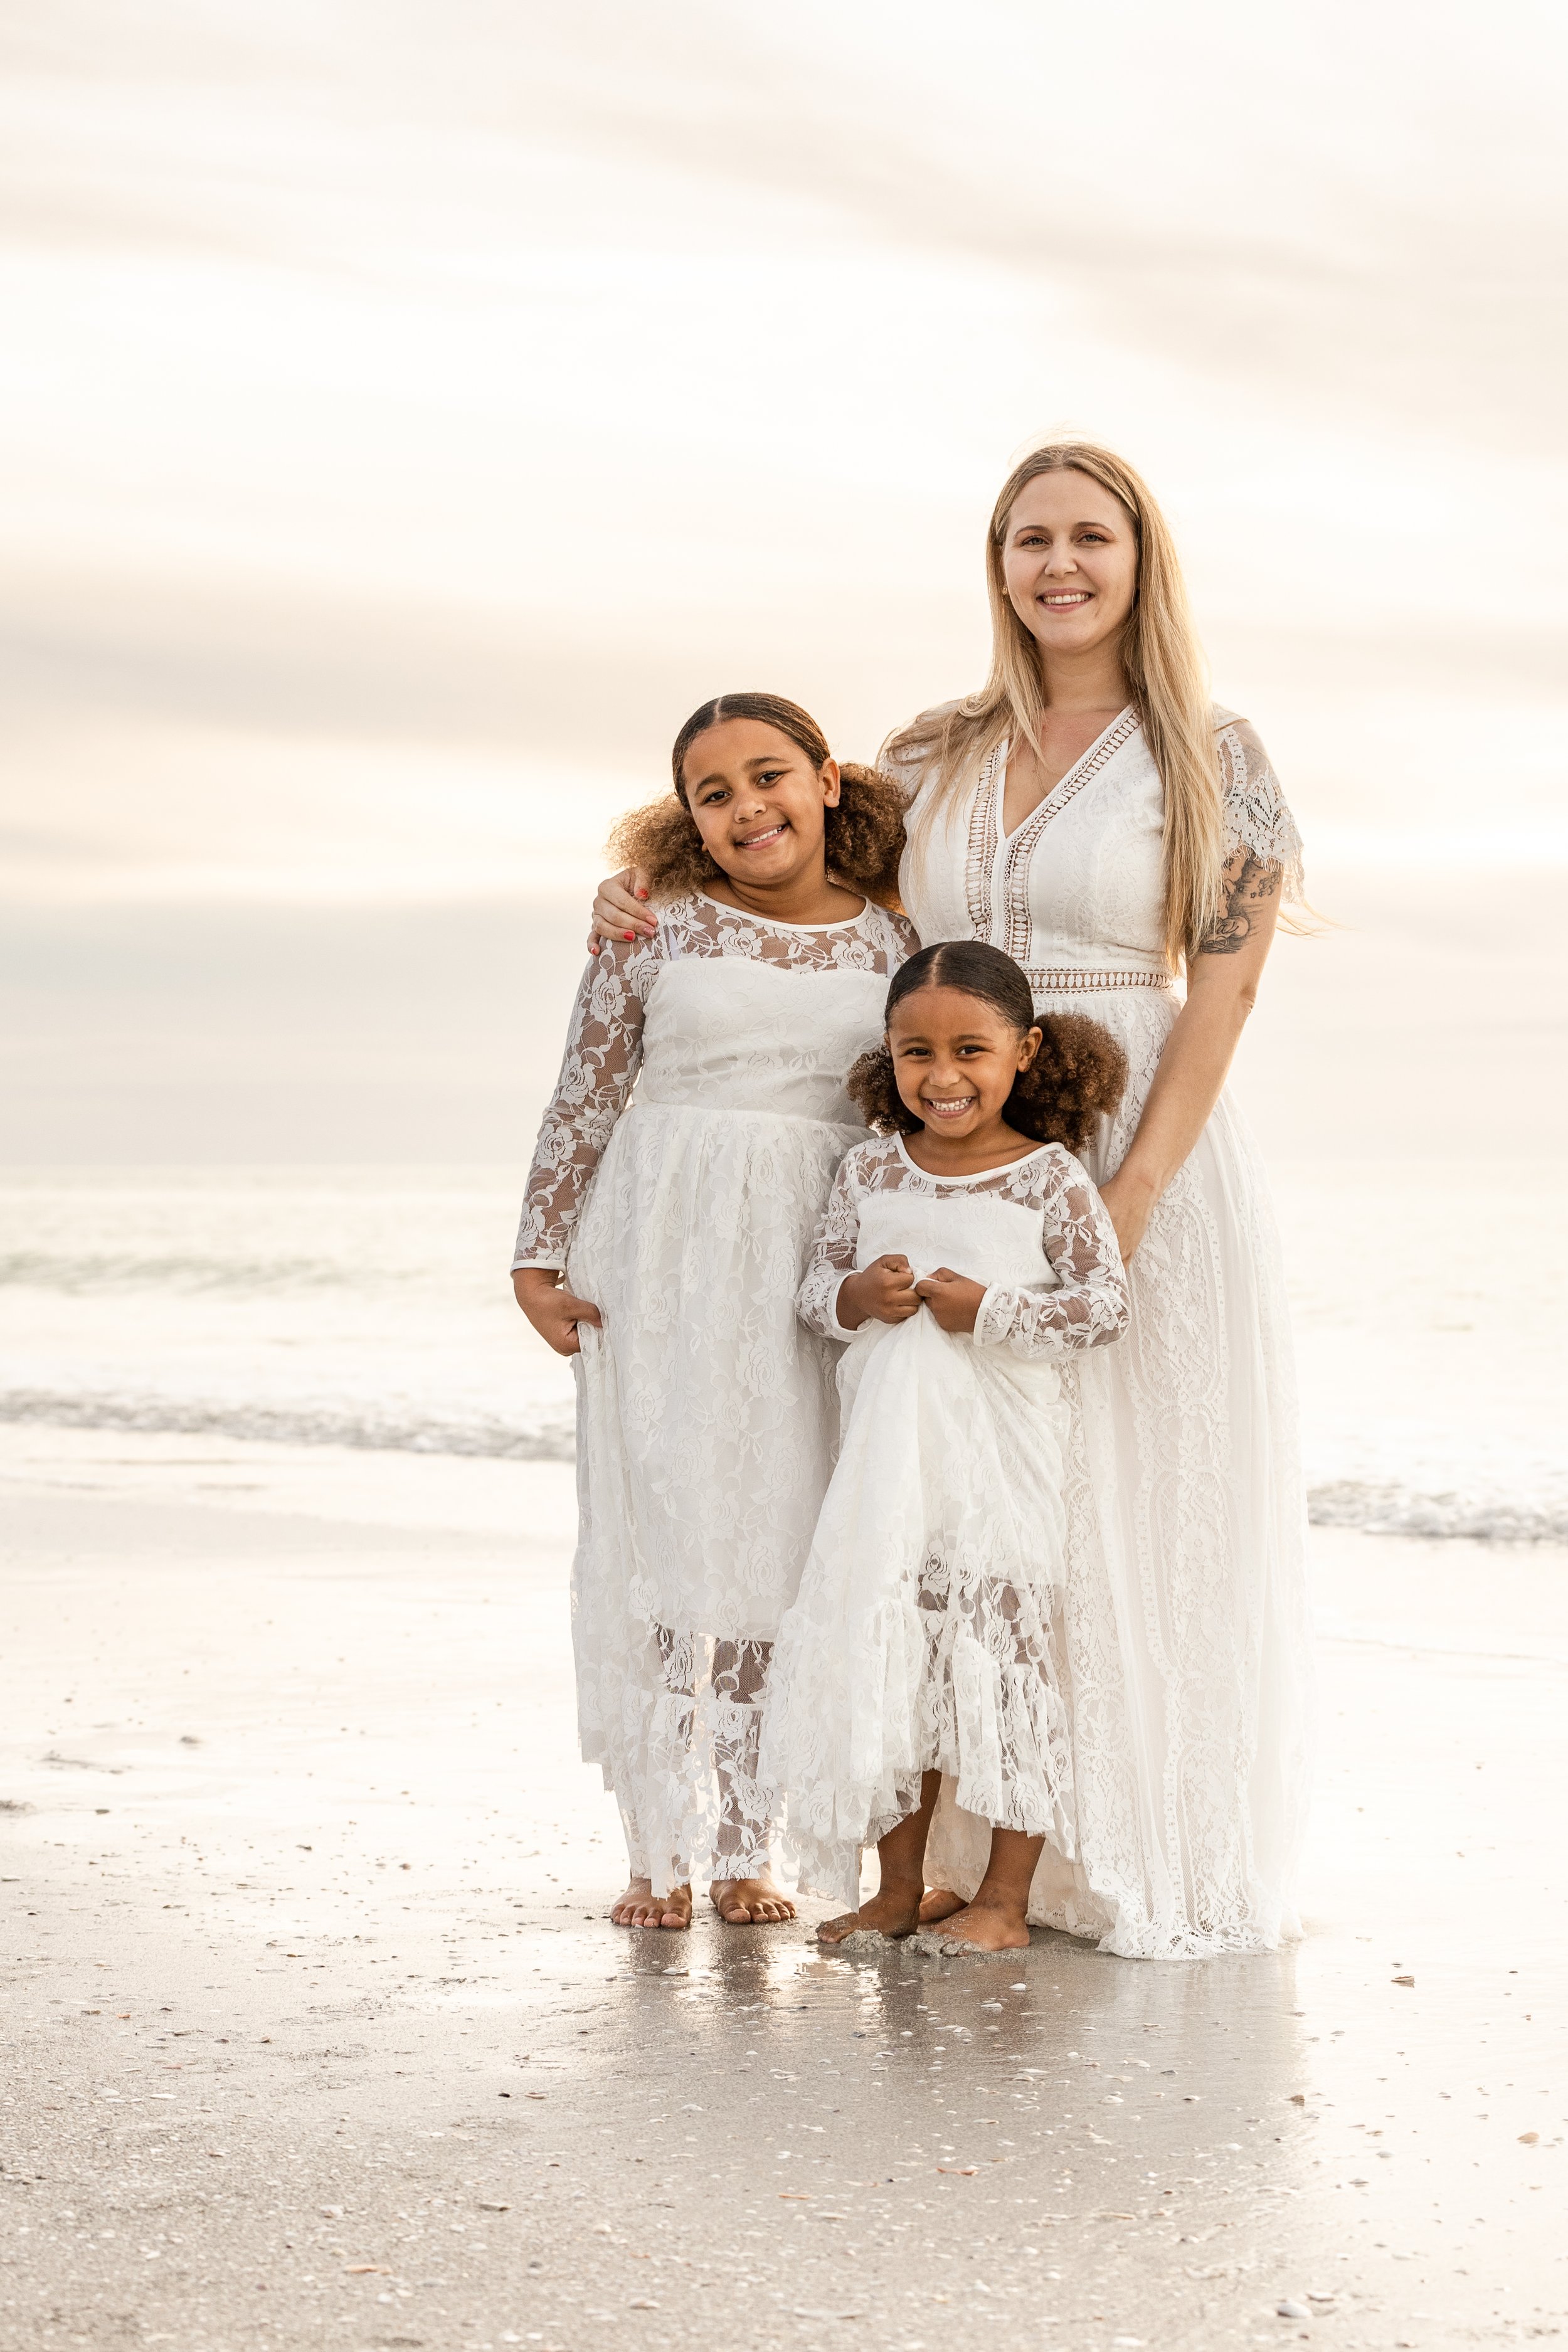  Family Beach photographer seth michael in pinellas county florida and the tampa bay area. 